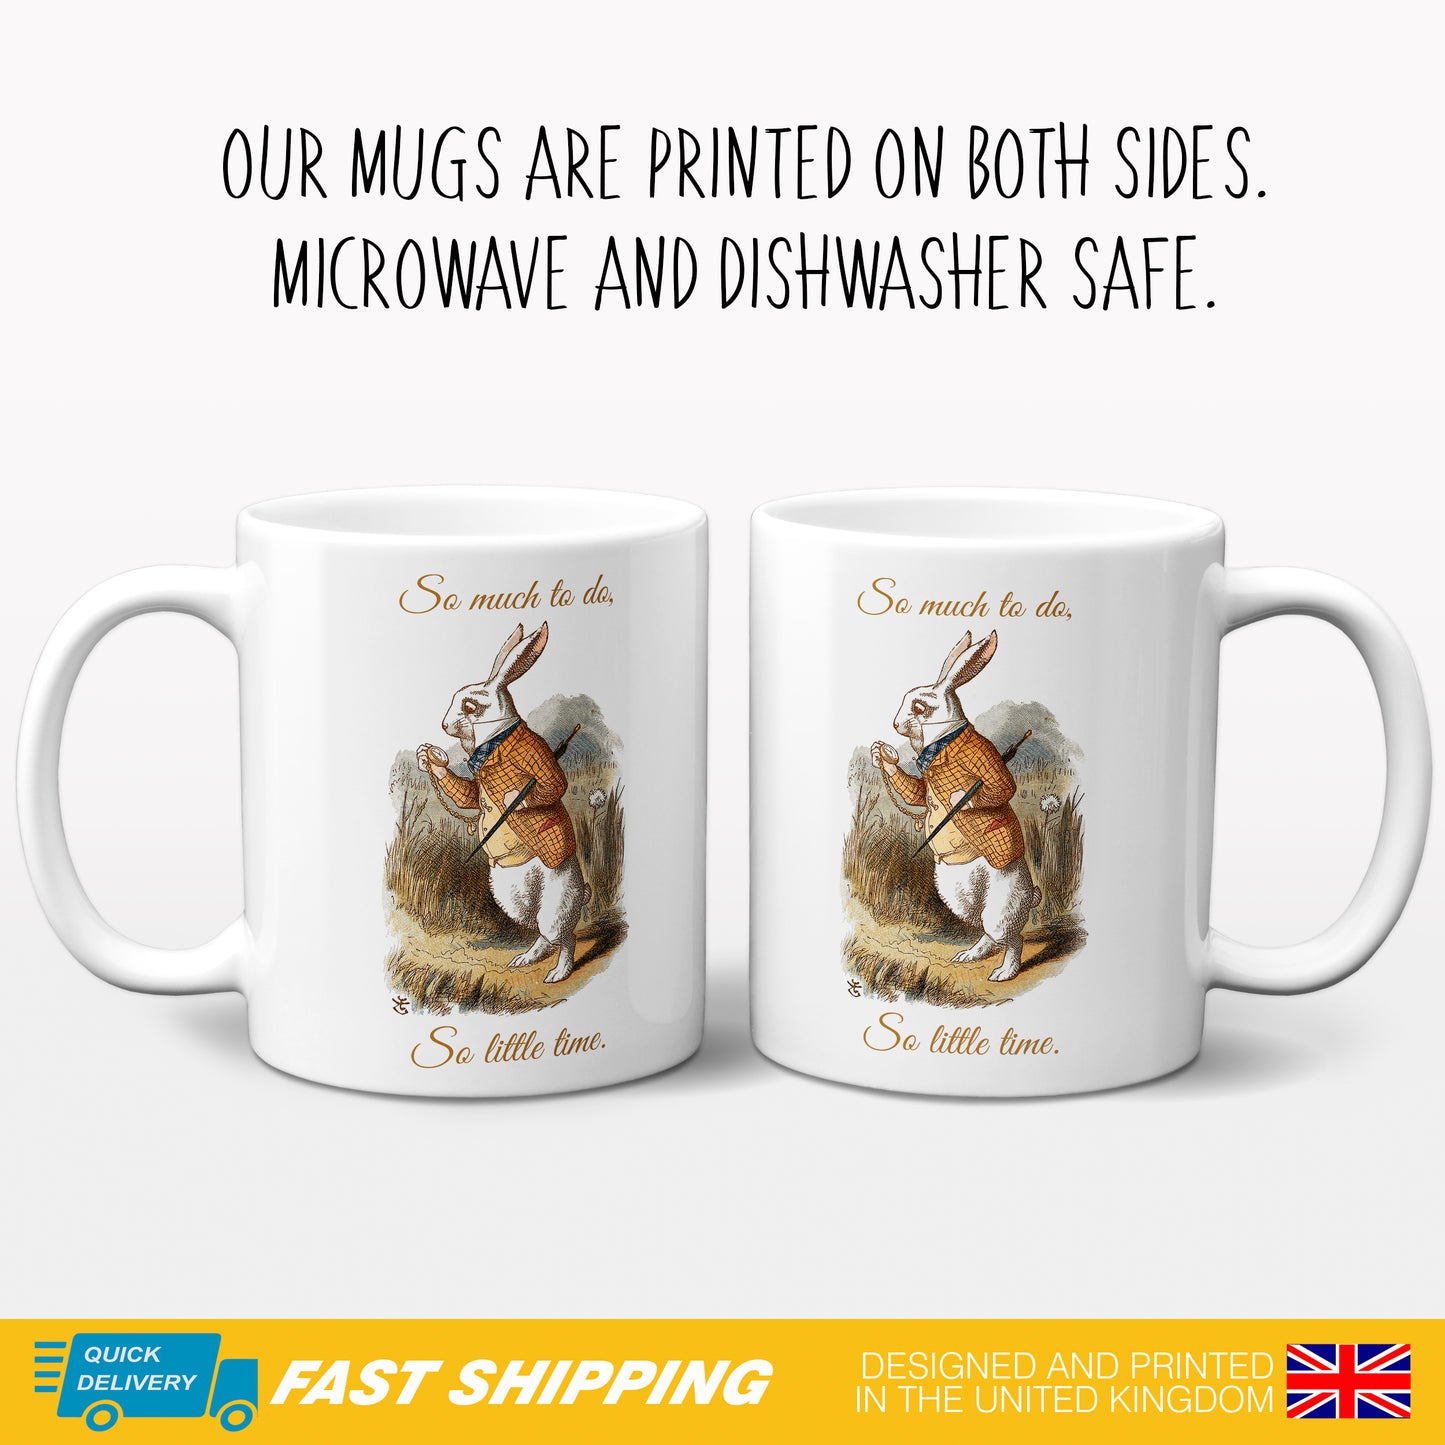 Alice in Wonderland Mug Gift depicting the white rabbit holding a pocket watch with the phrase 'So much to do, so little time' showing 2 mugs with front and back images